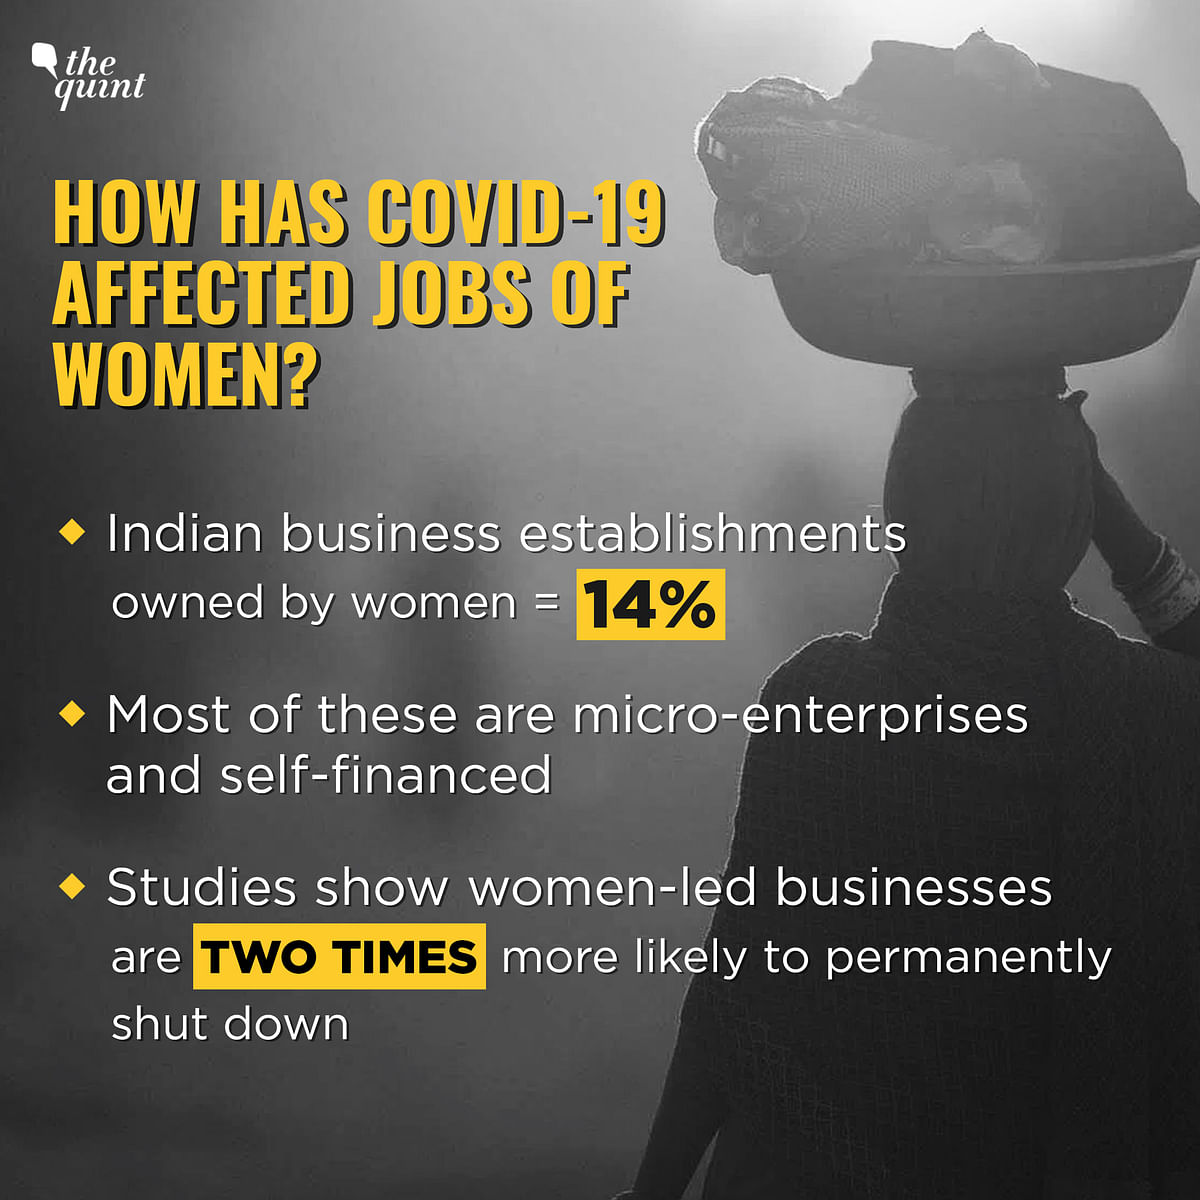 There is growing  evidence that women-led businesses are two times more likely to permanently shut their operations.